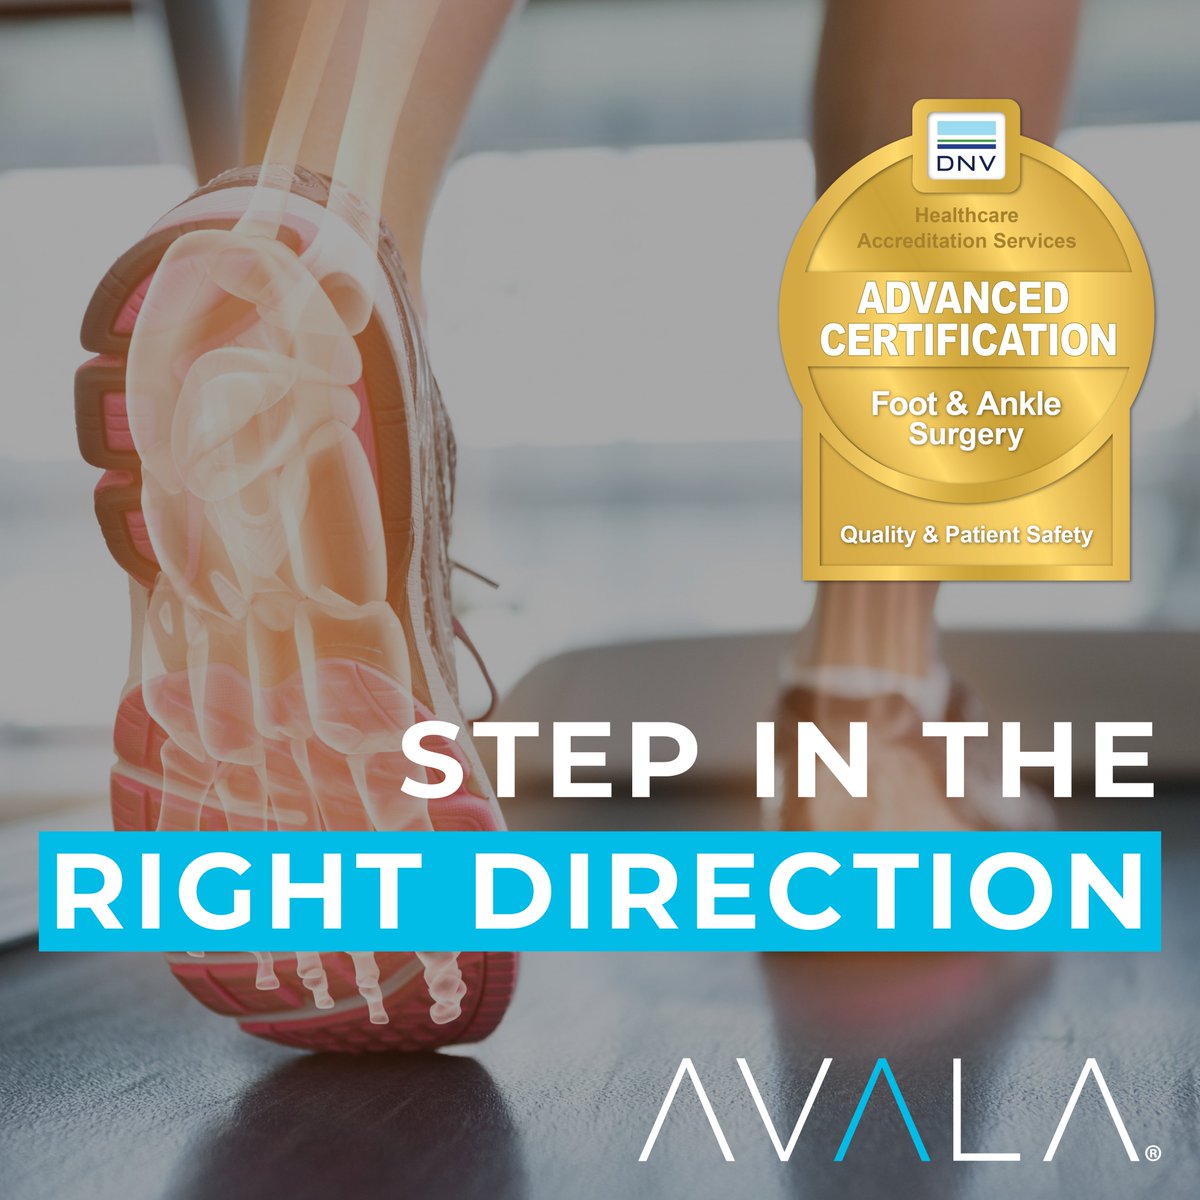 Stop waiting, step in the right direction with AVALA's orthopedic foot & ankle specialists! We are here to help you take the next step!

avala.com/coe | 985.809.9888

#avalahealth #dnv #centerofexcellence #advancedcertification #footsurgery #anklesurgery #foot #ankle